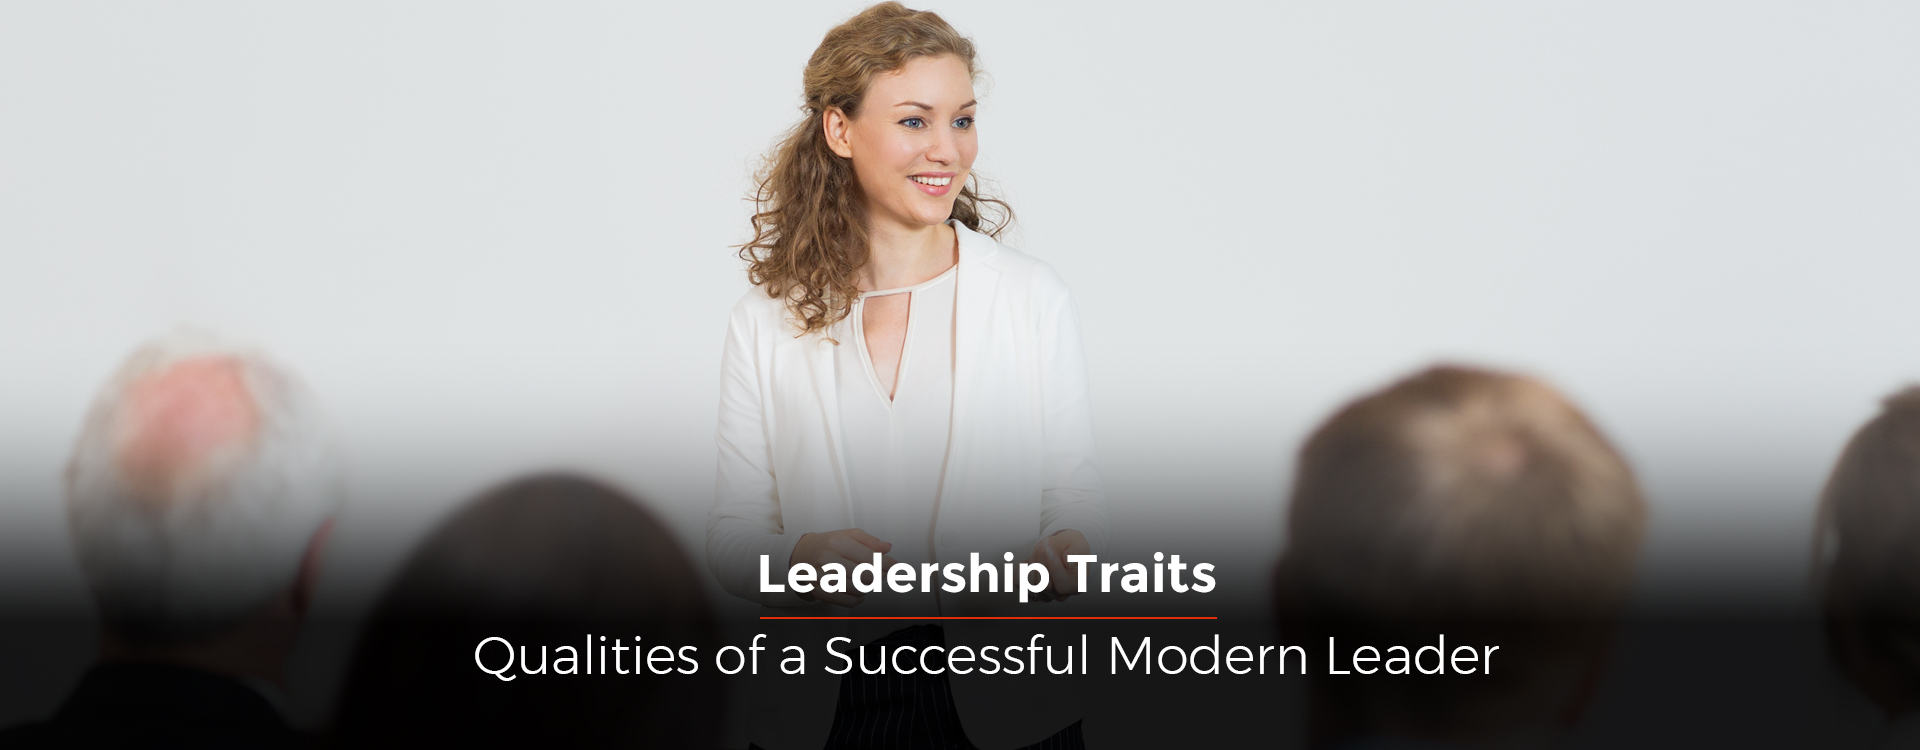 Leadership Traits - Qualities of a Successful Modern Leader